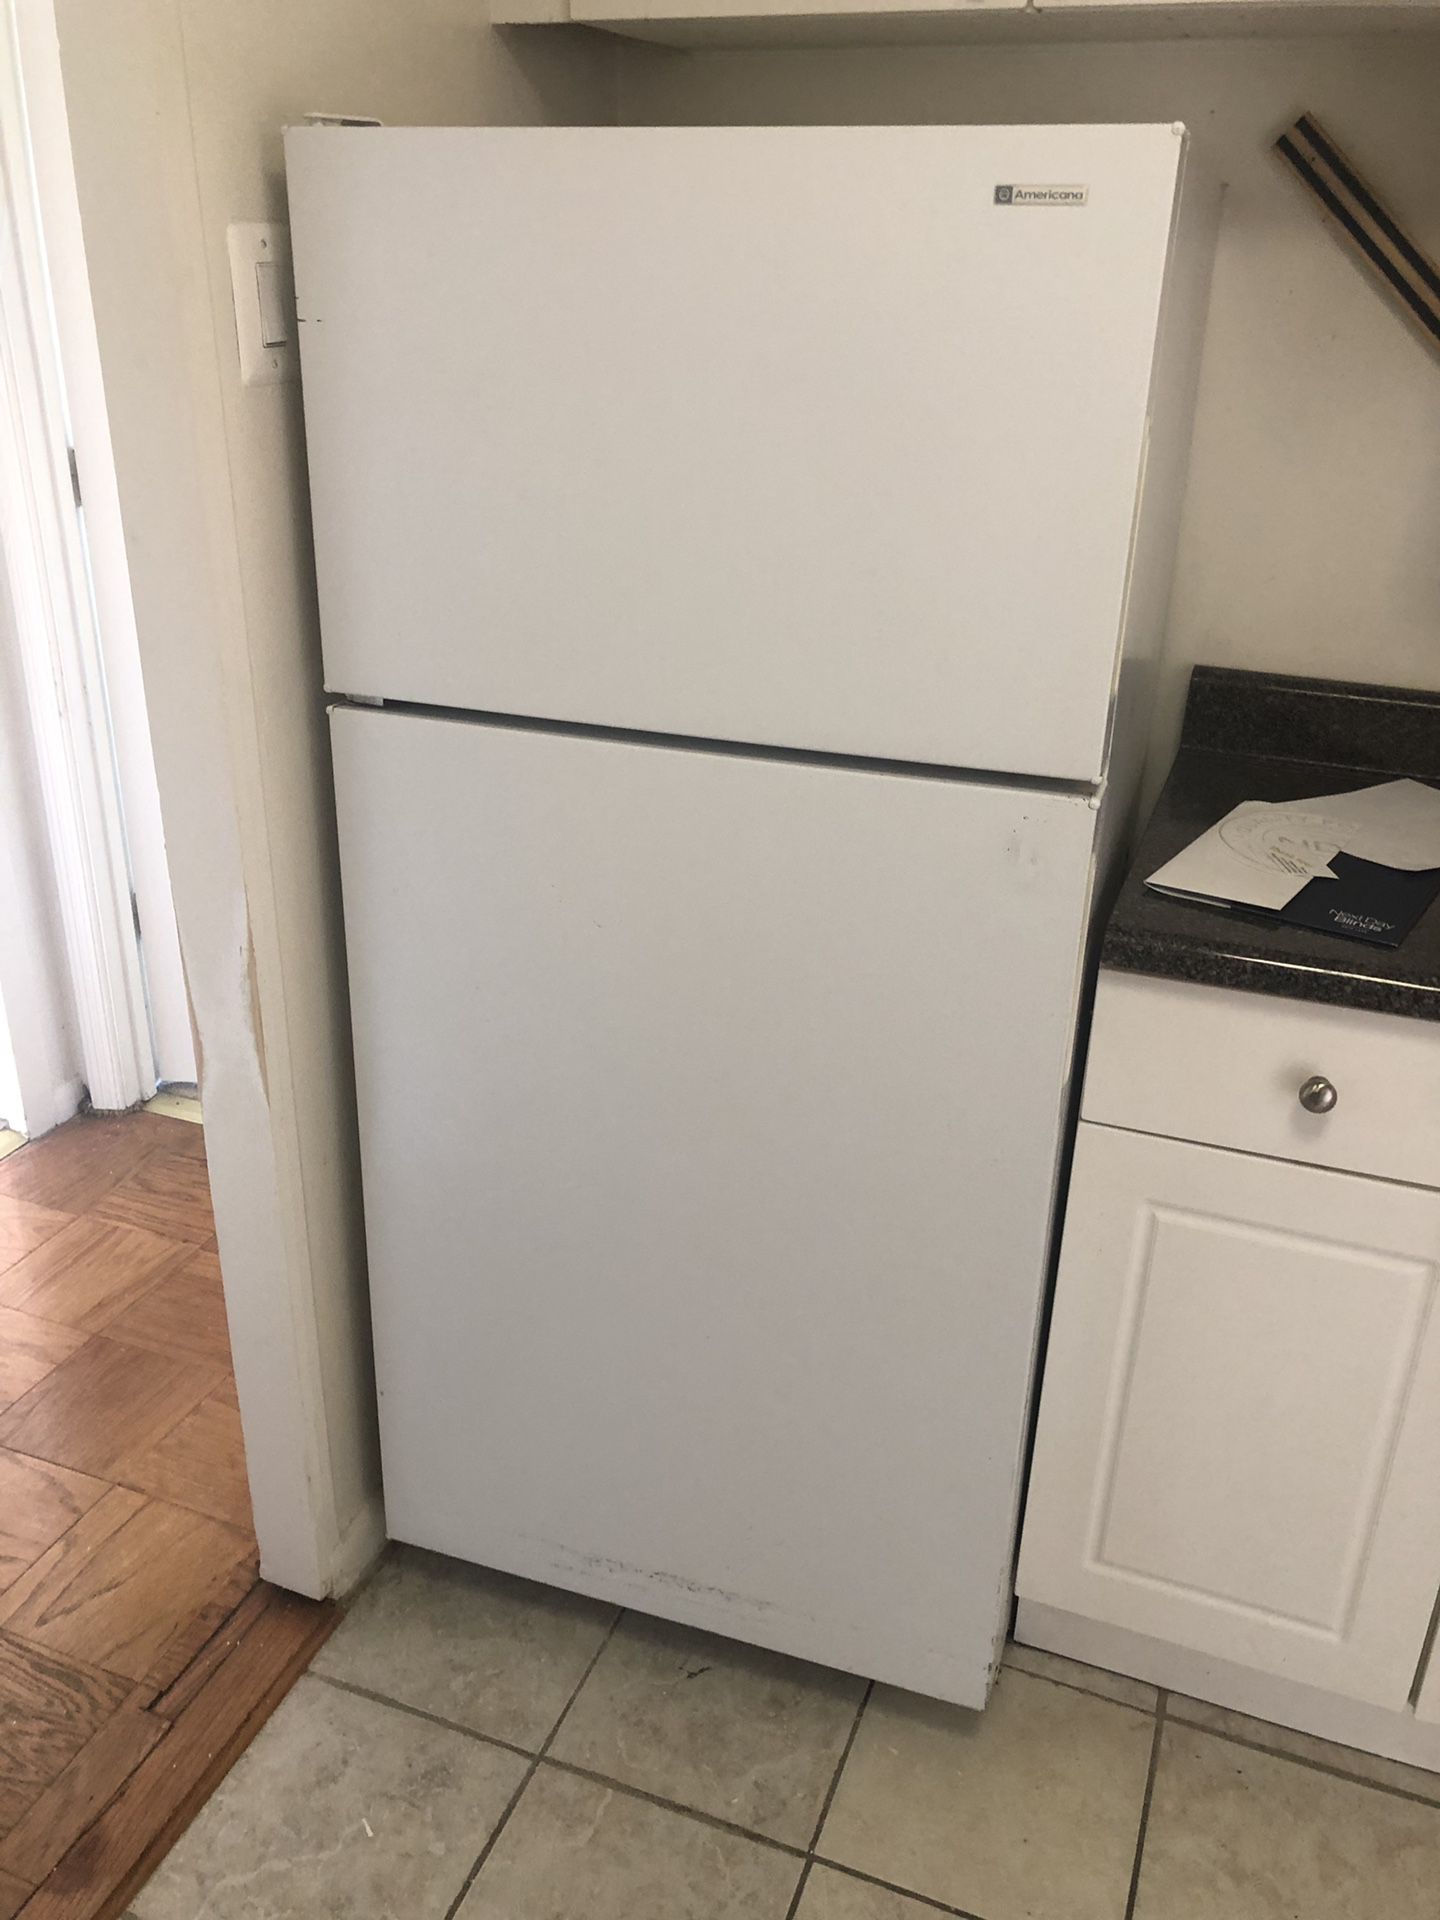 Refrigerator and washer dryer